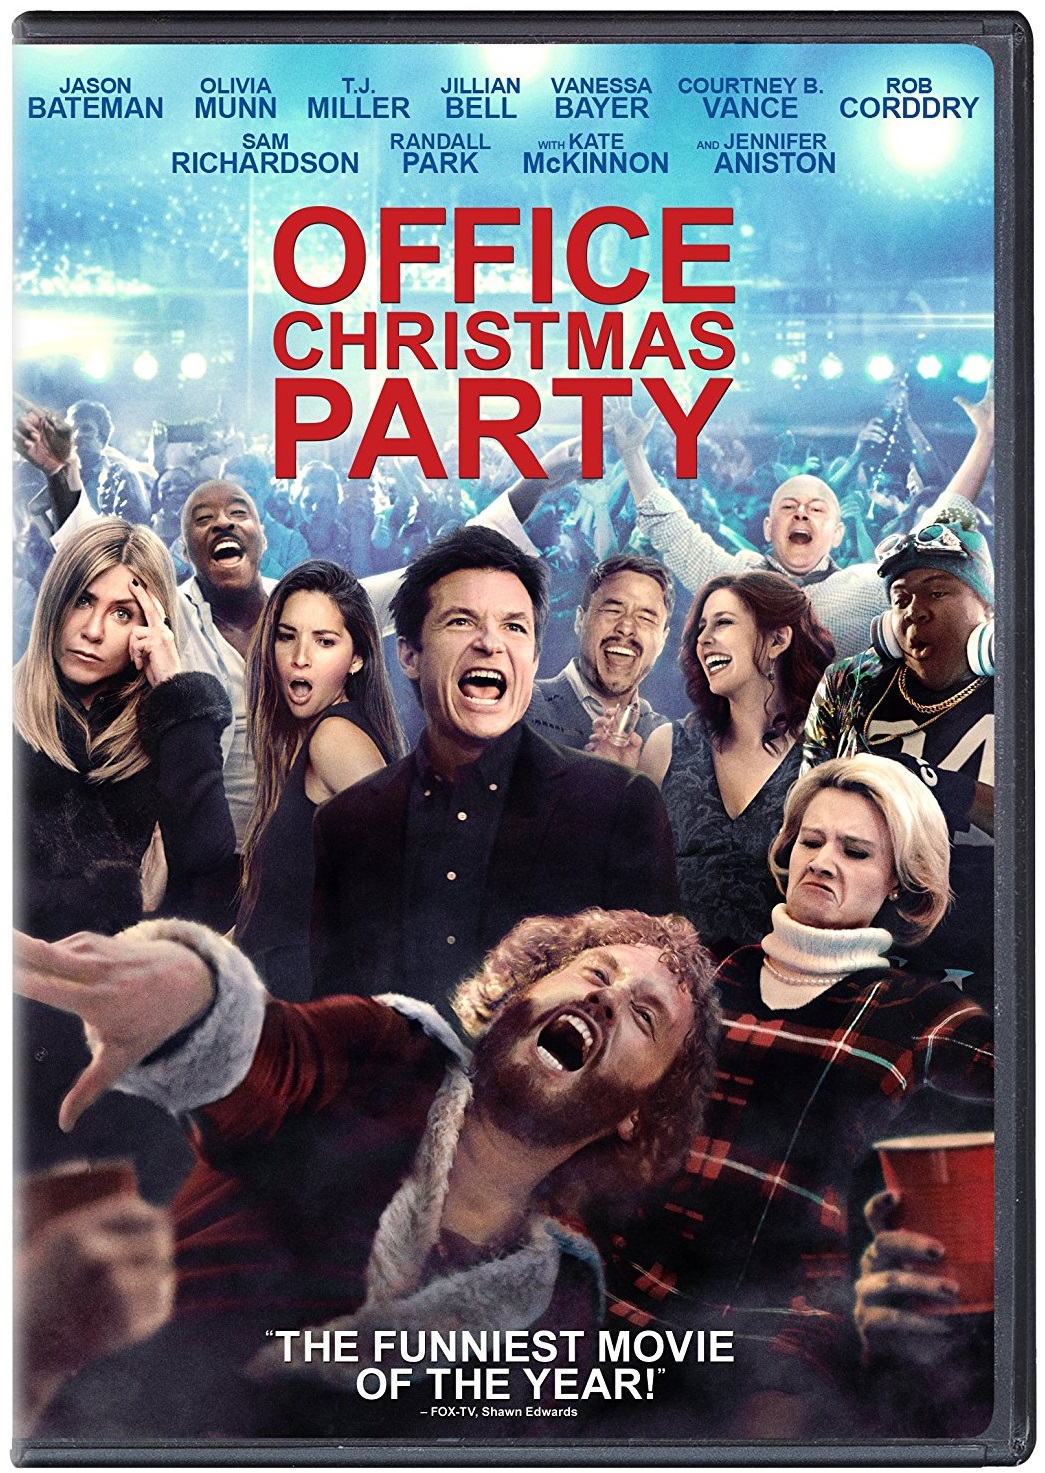 Office Christmas Party - DVD review